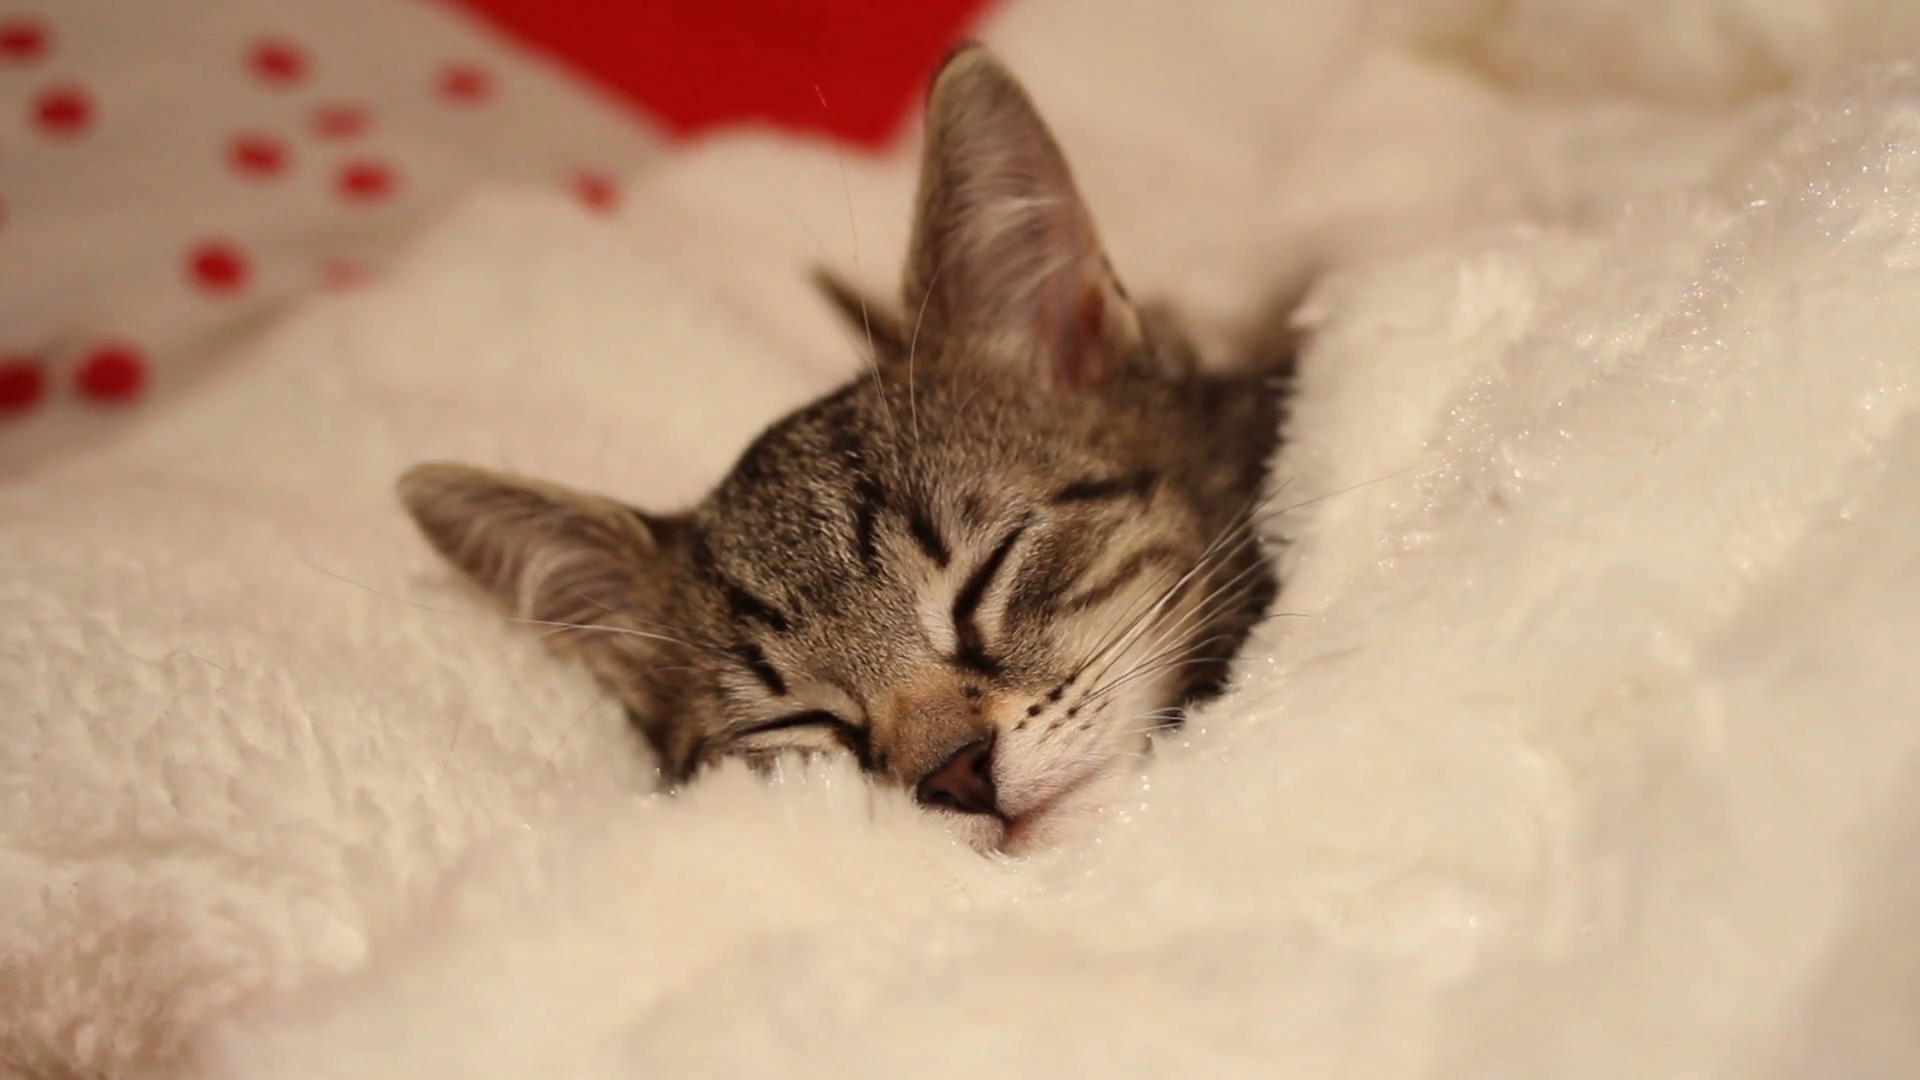 kittens napping wrapped in a white blanket, untill one kitten wakes ...